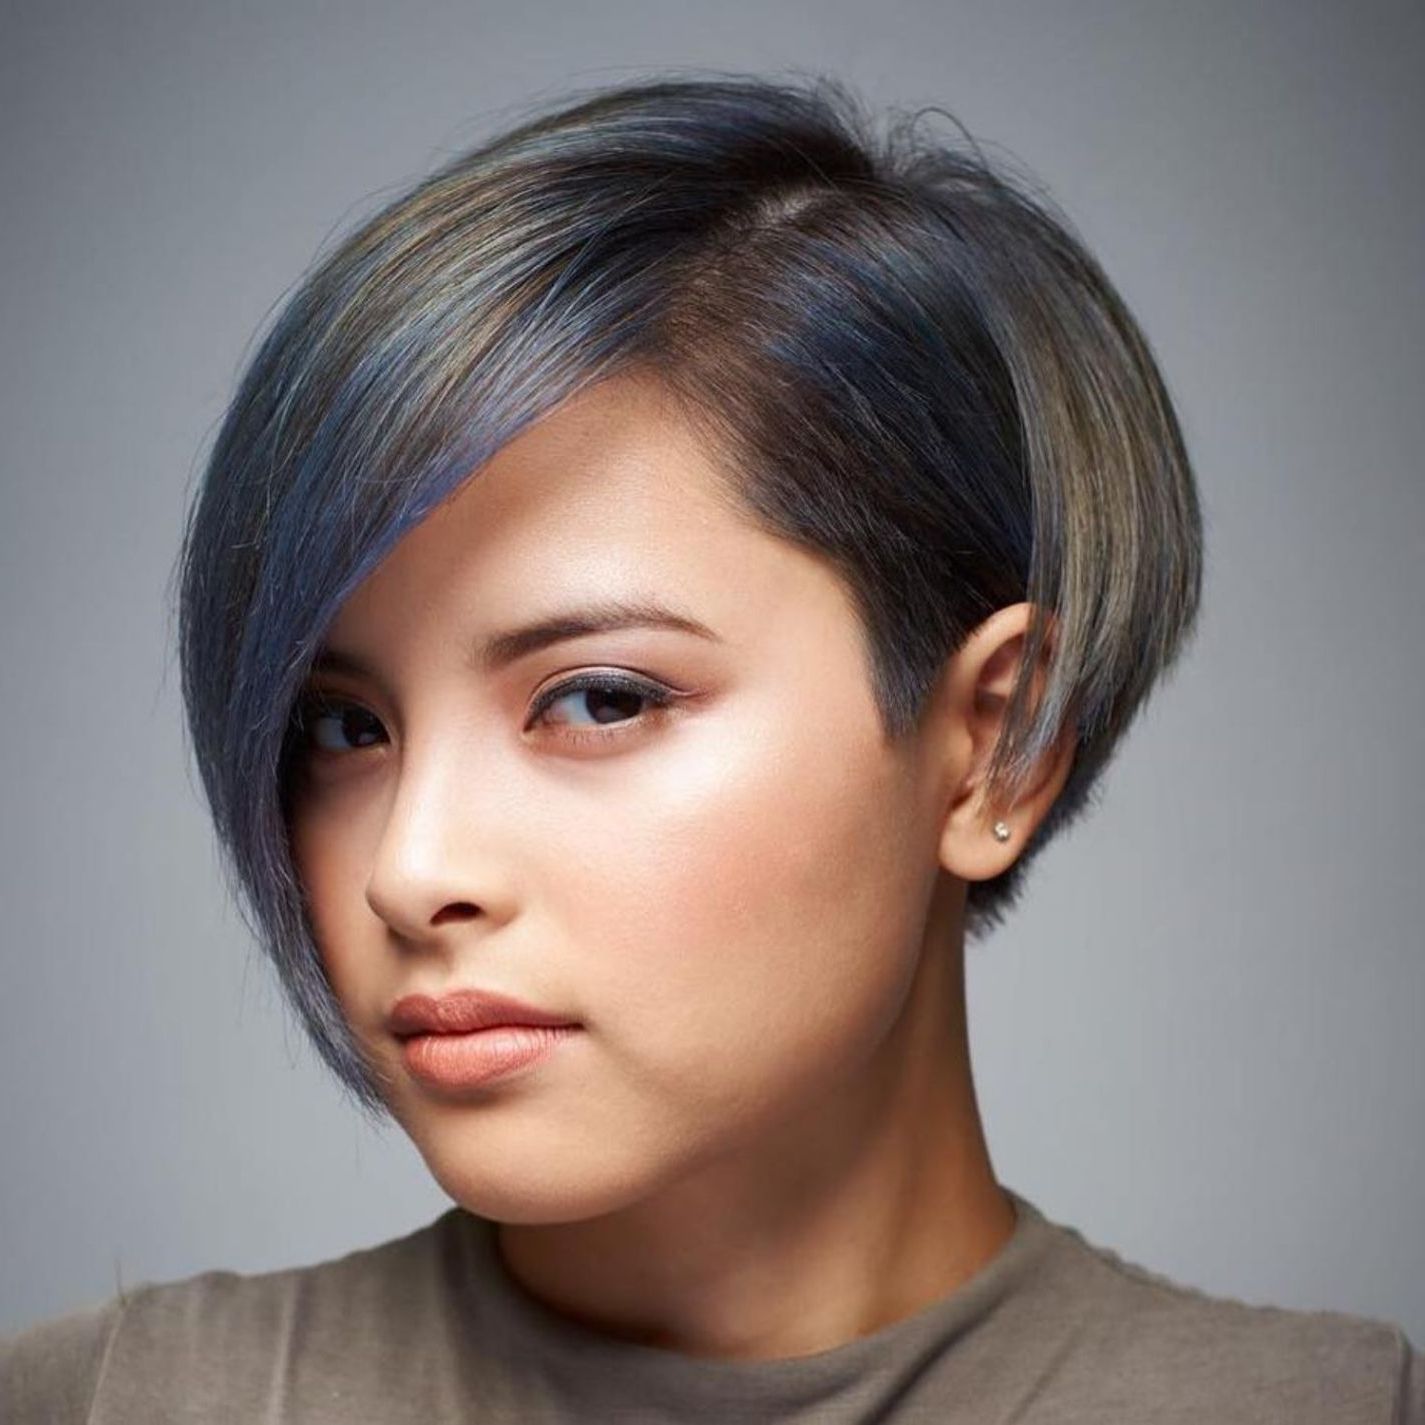 50 Super Cute Looks With Short Hairstyles For Round Faces In For Color Highlights Short Hairstyles For Round Face Types (View 11 of 20)